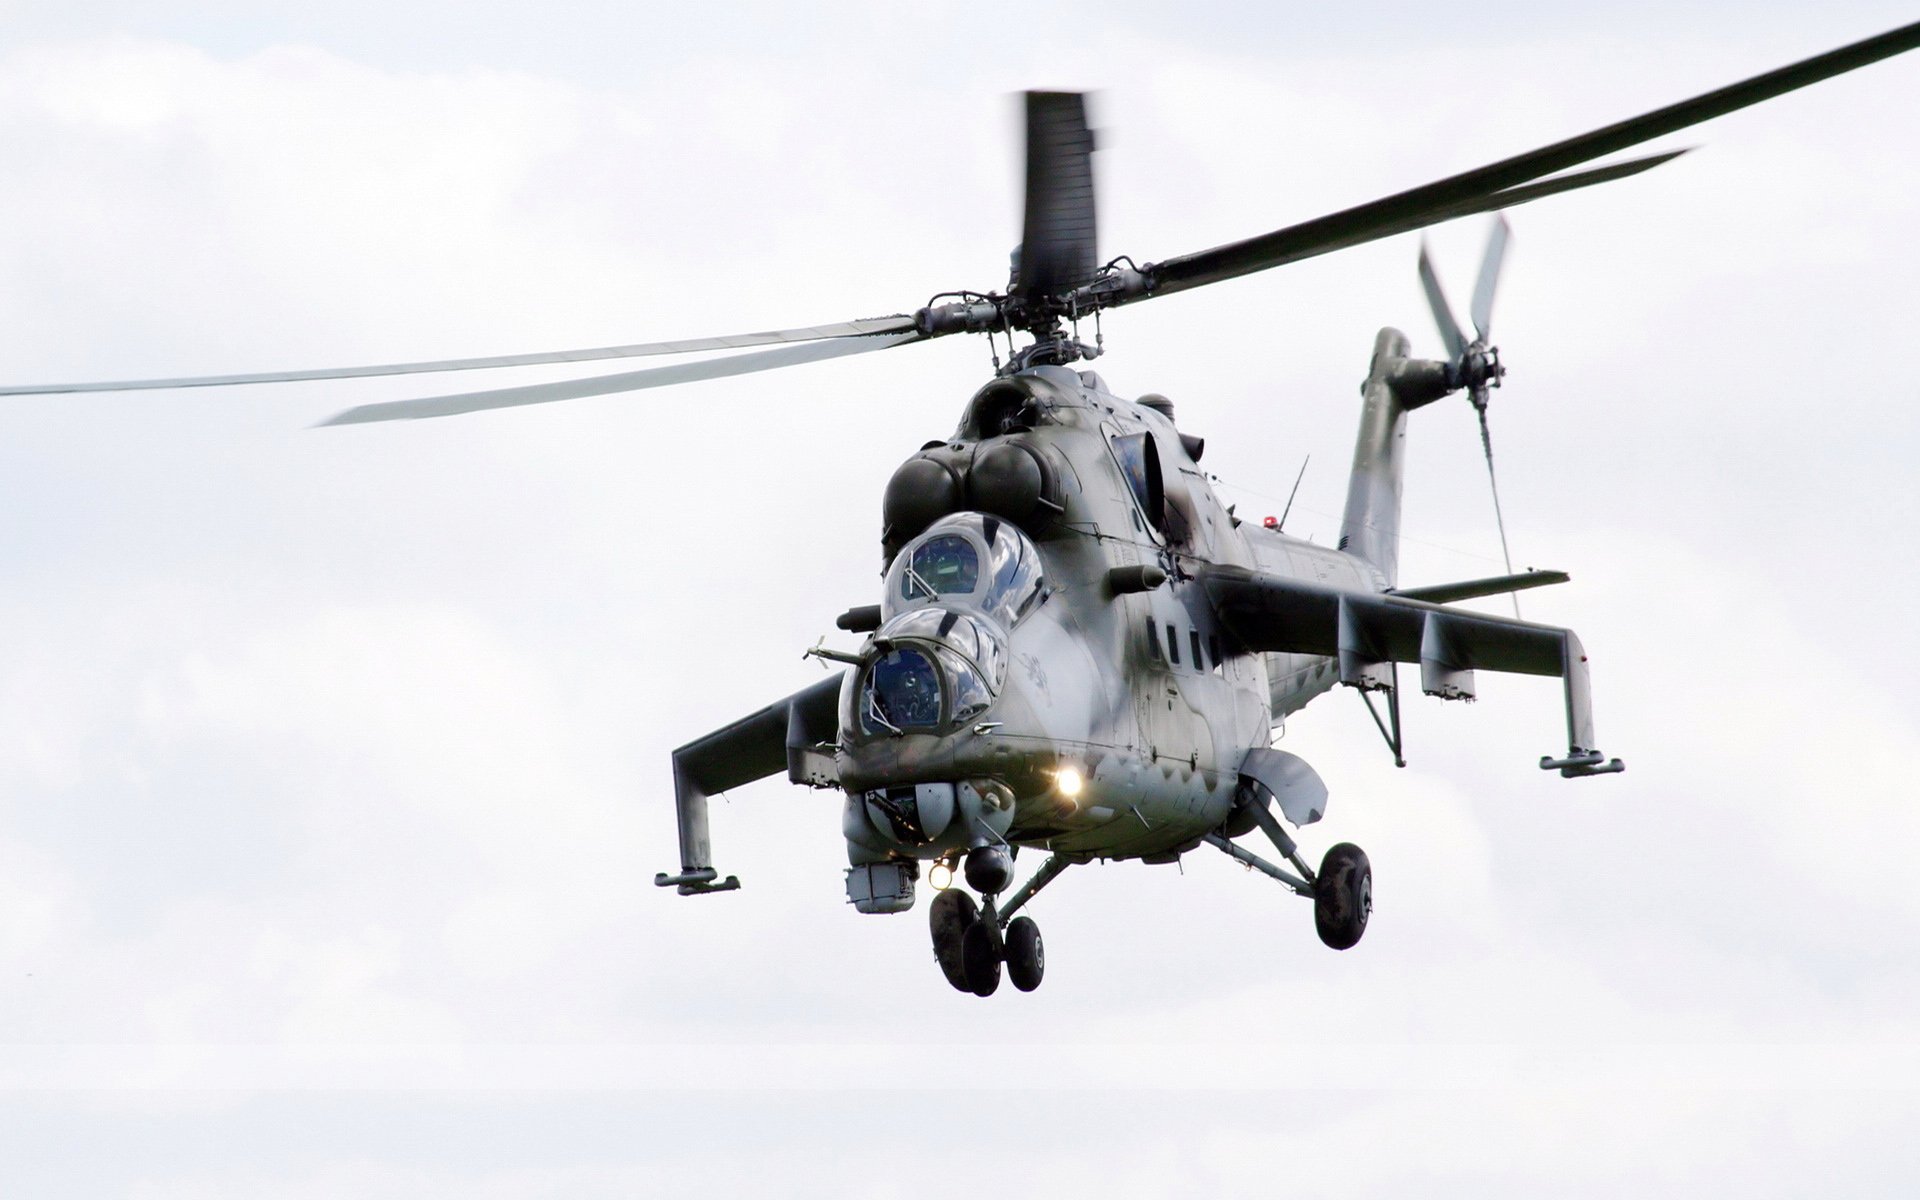 mi 24, Hind, Gunship, Russian, Russia, Military, Weapon, Helicopter, Aircraft,  21 Wallpaper